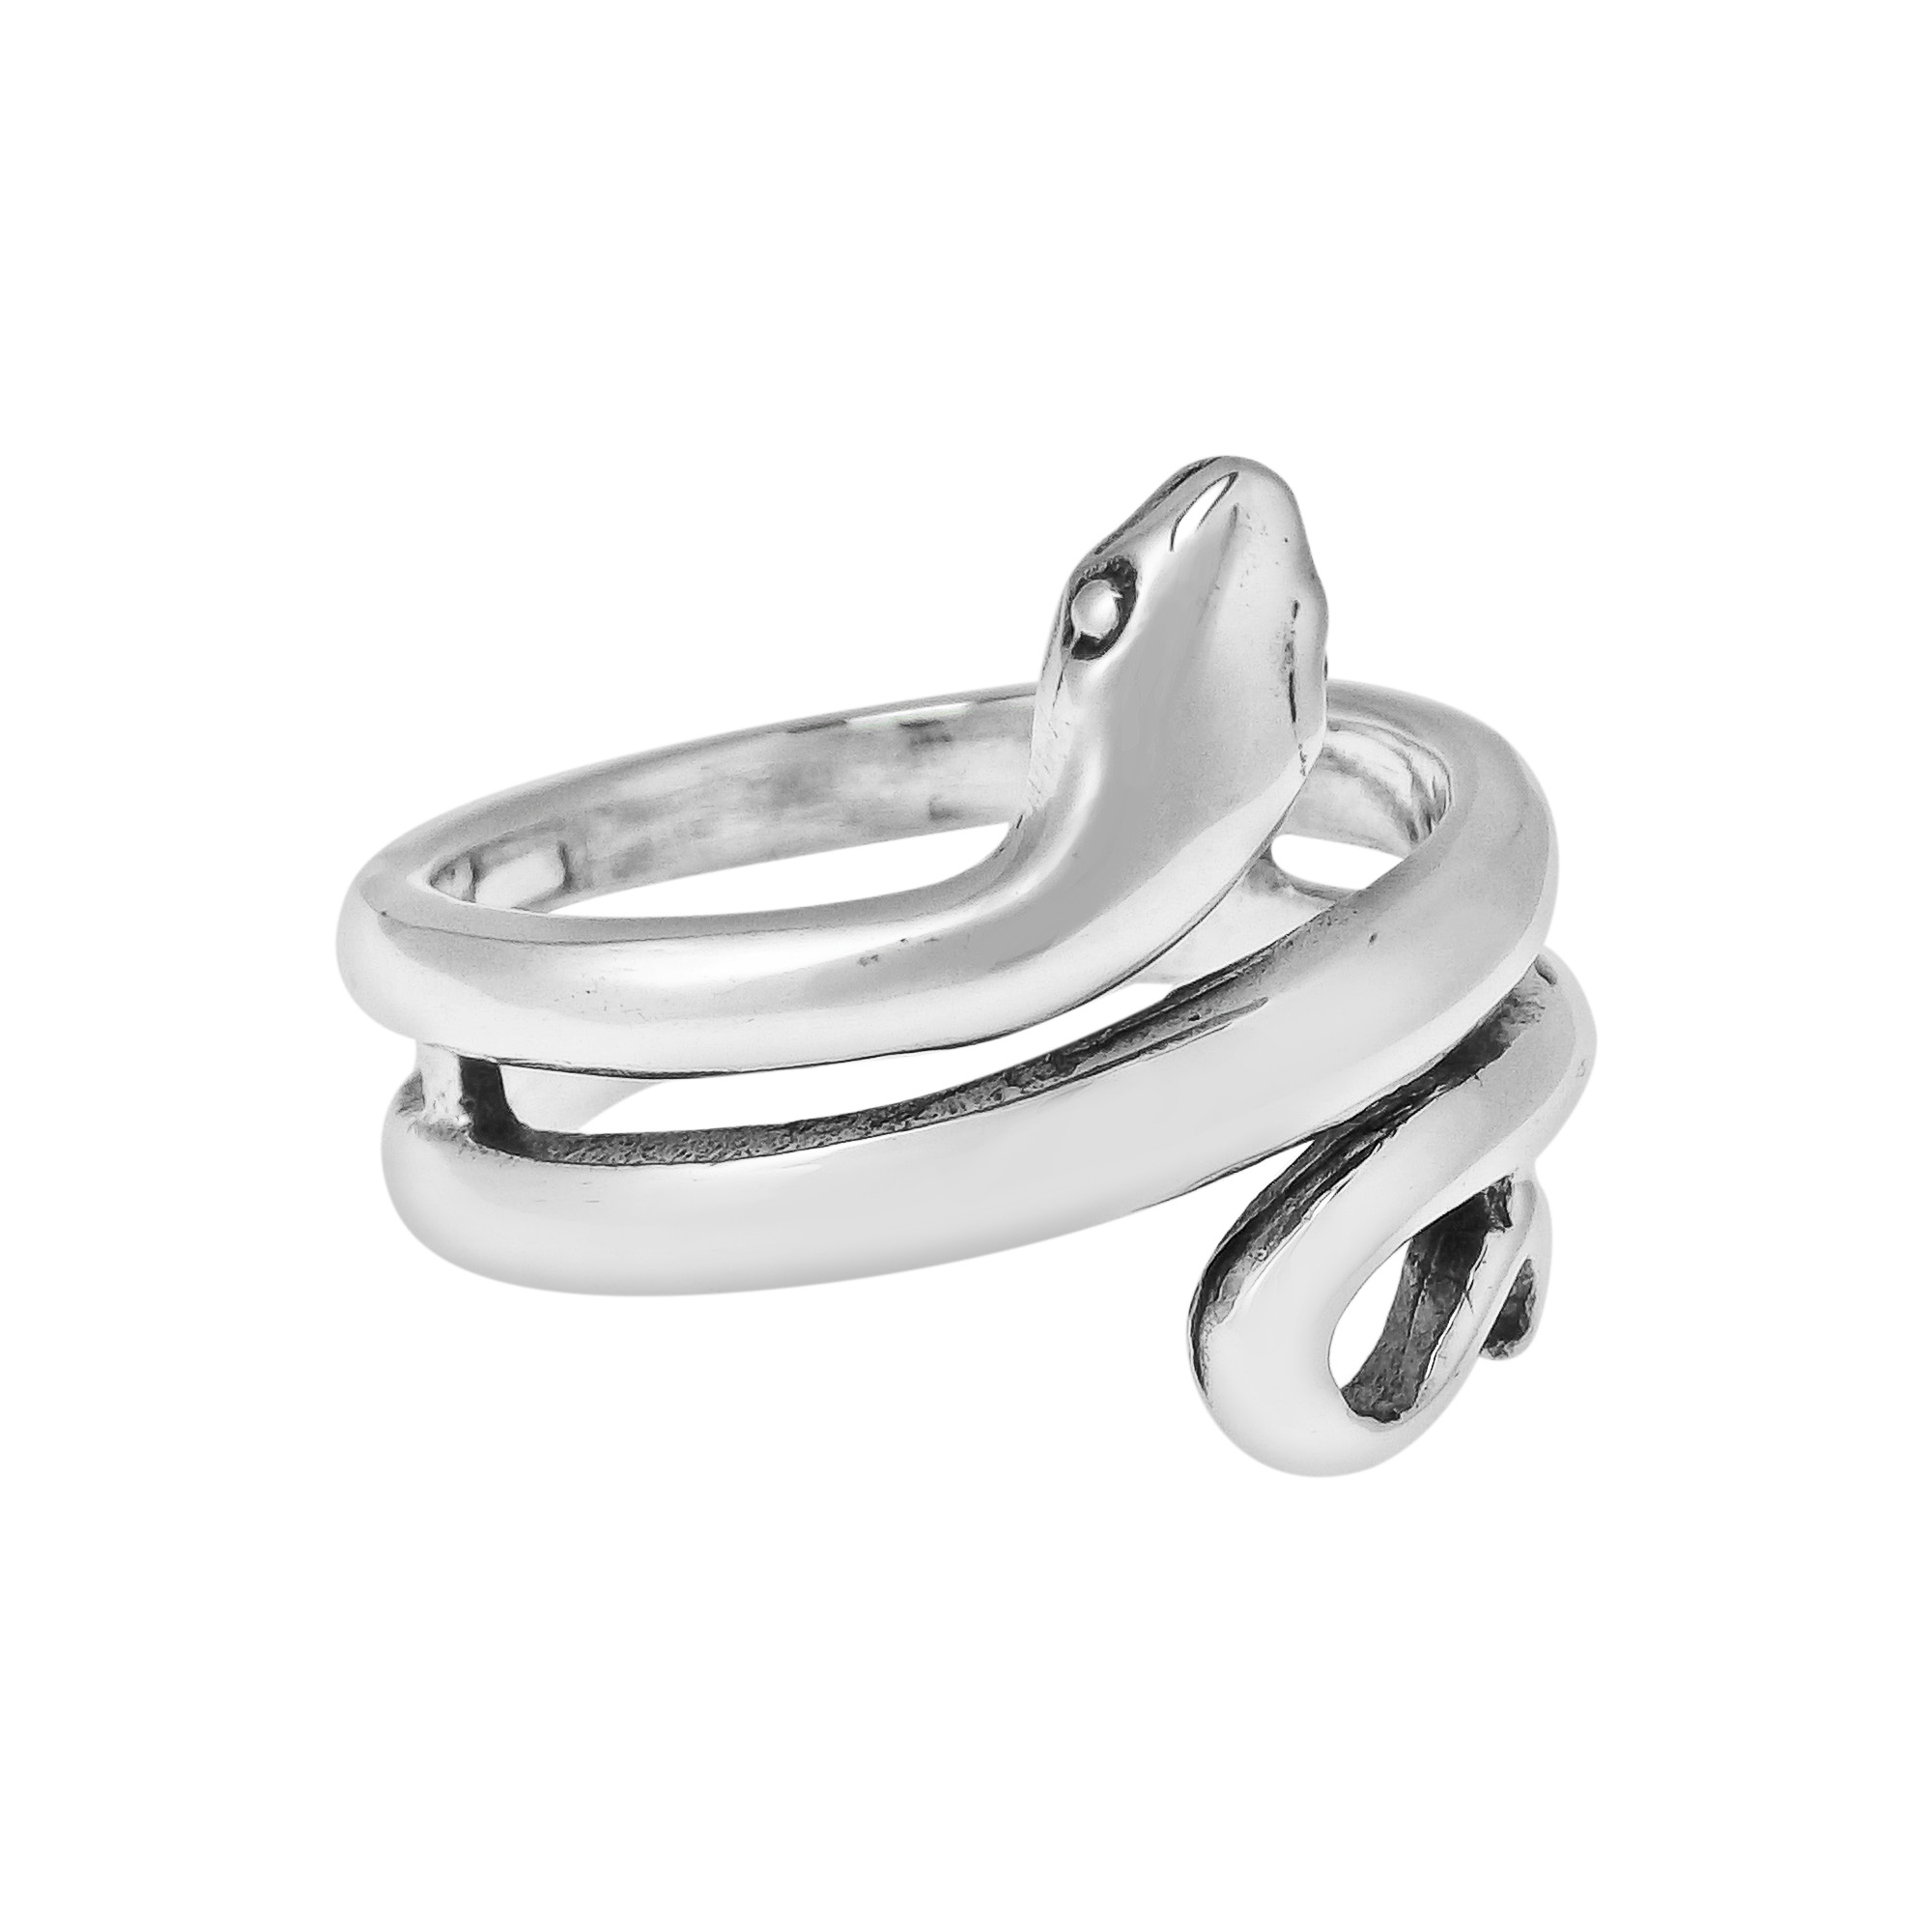 AeraVida Mark of The Twin Dragon .925 Sterling Silver Toe Ring or Pinky Ring 